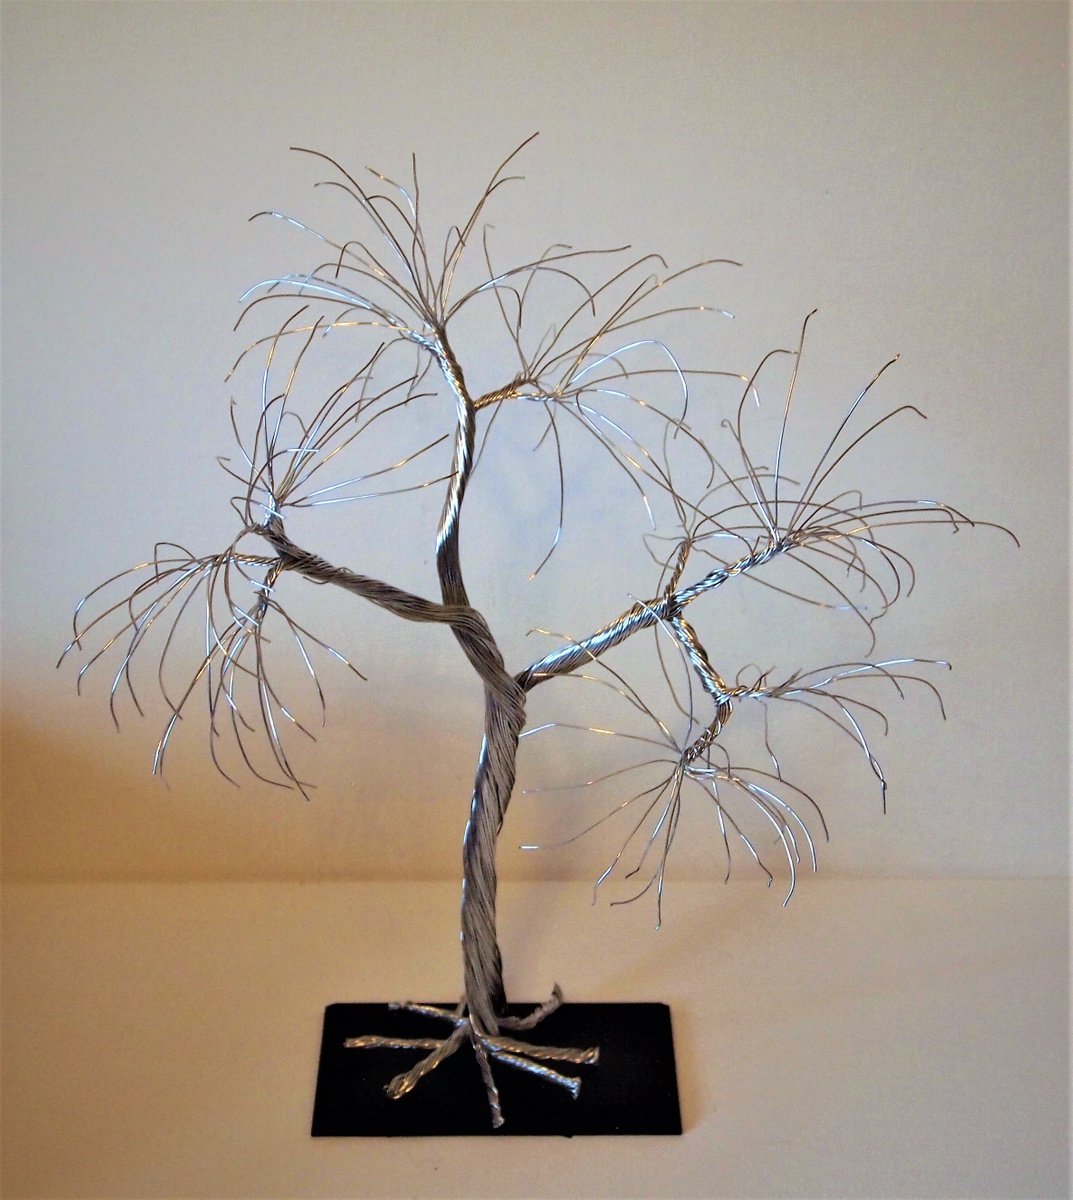 Silver wire willow tree sculpture by Steph Morgan